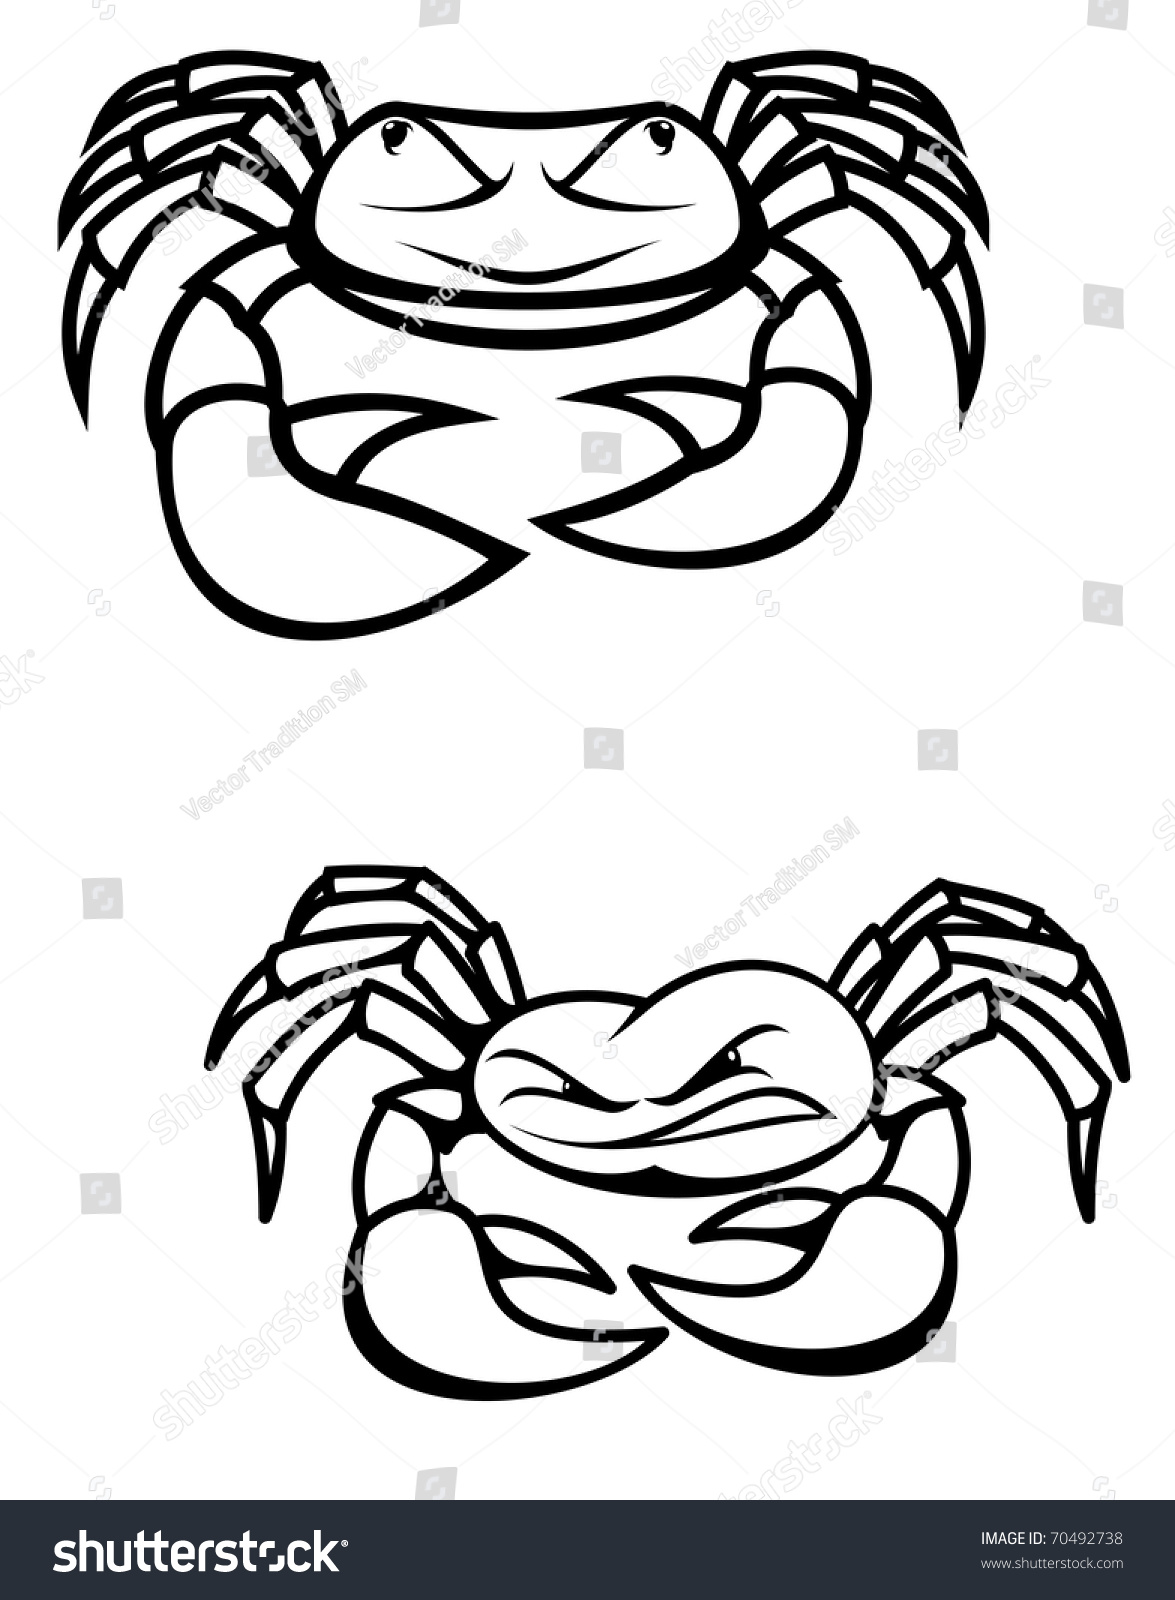 printable-crab-claw-template